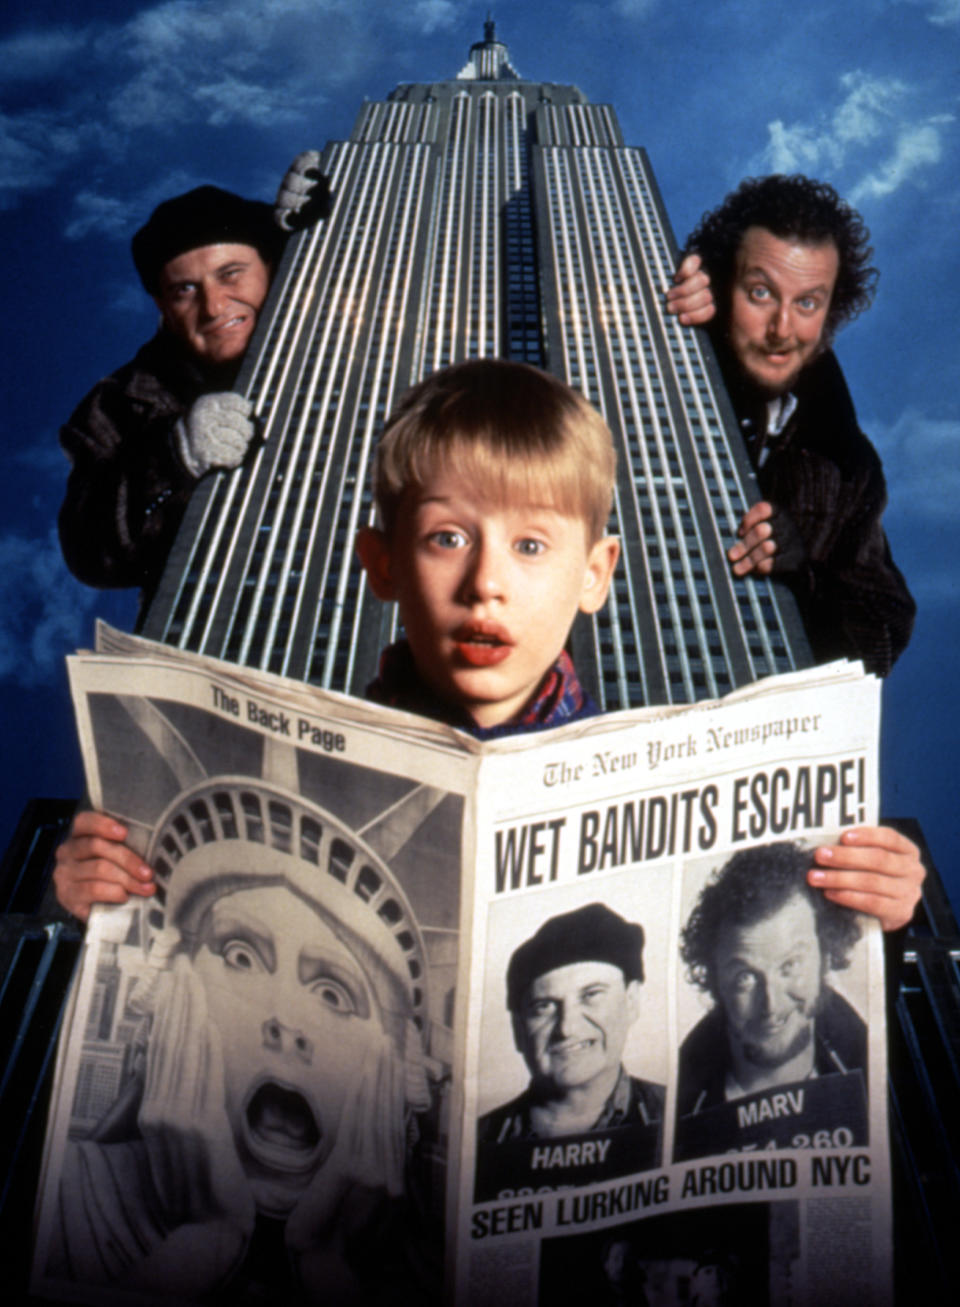 Poster for "Home Alone 2"